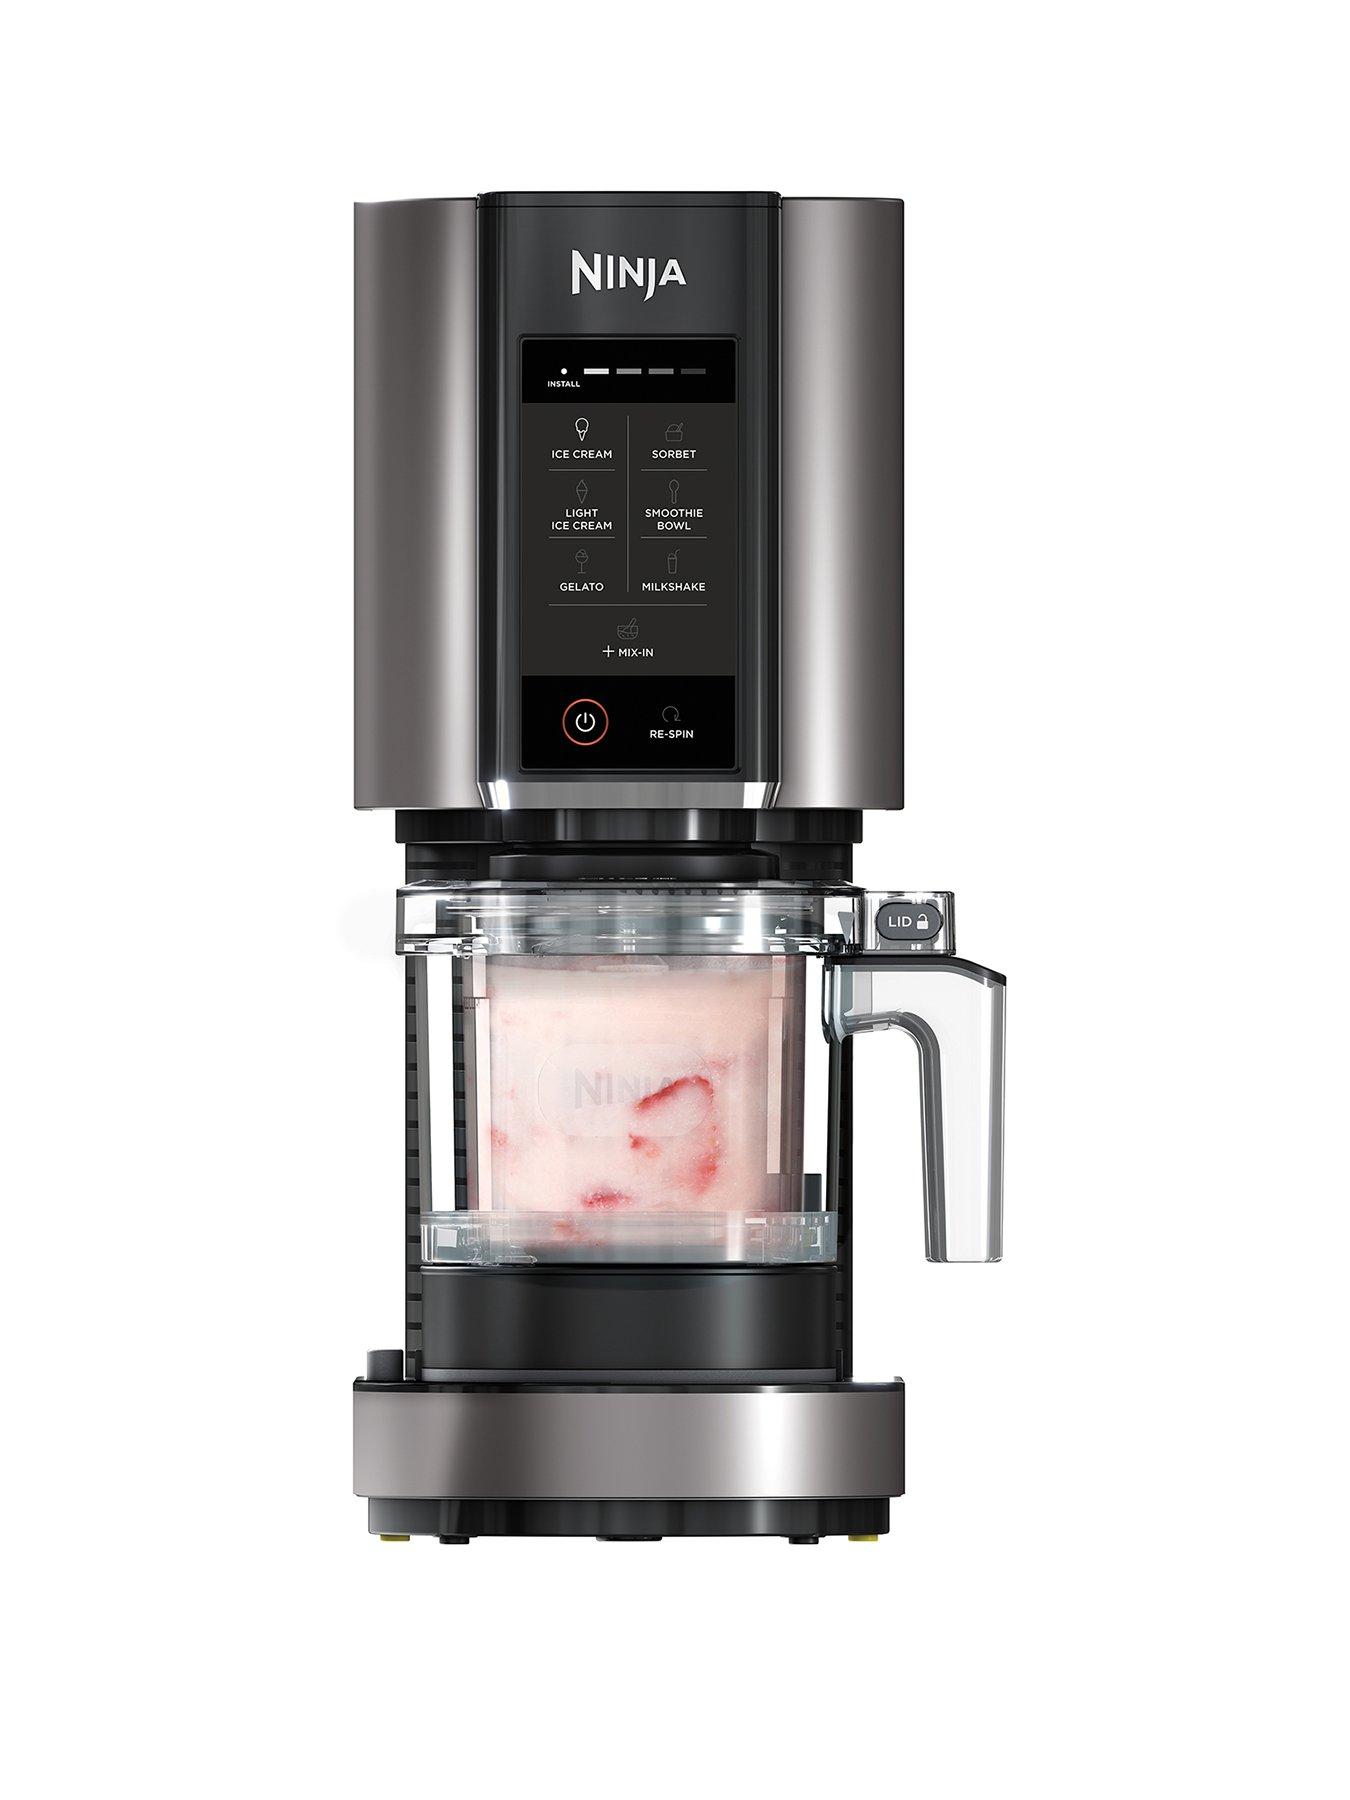 Ninja's CREAMi ice cream makers now even lower from $170 ($60 off